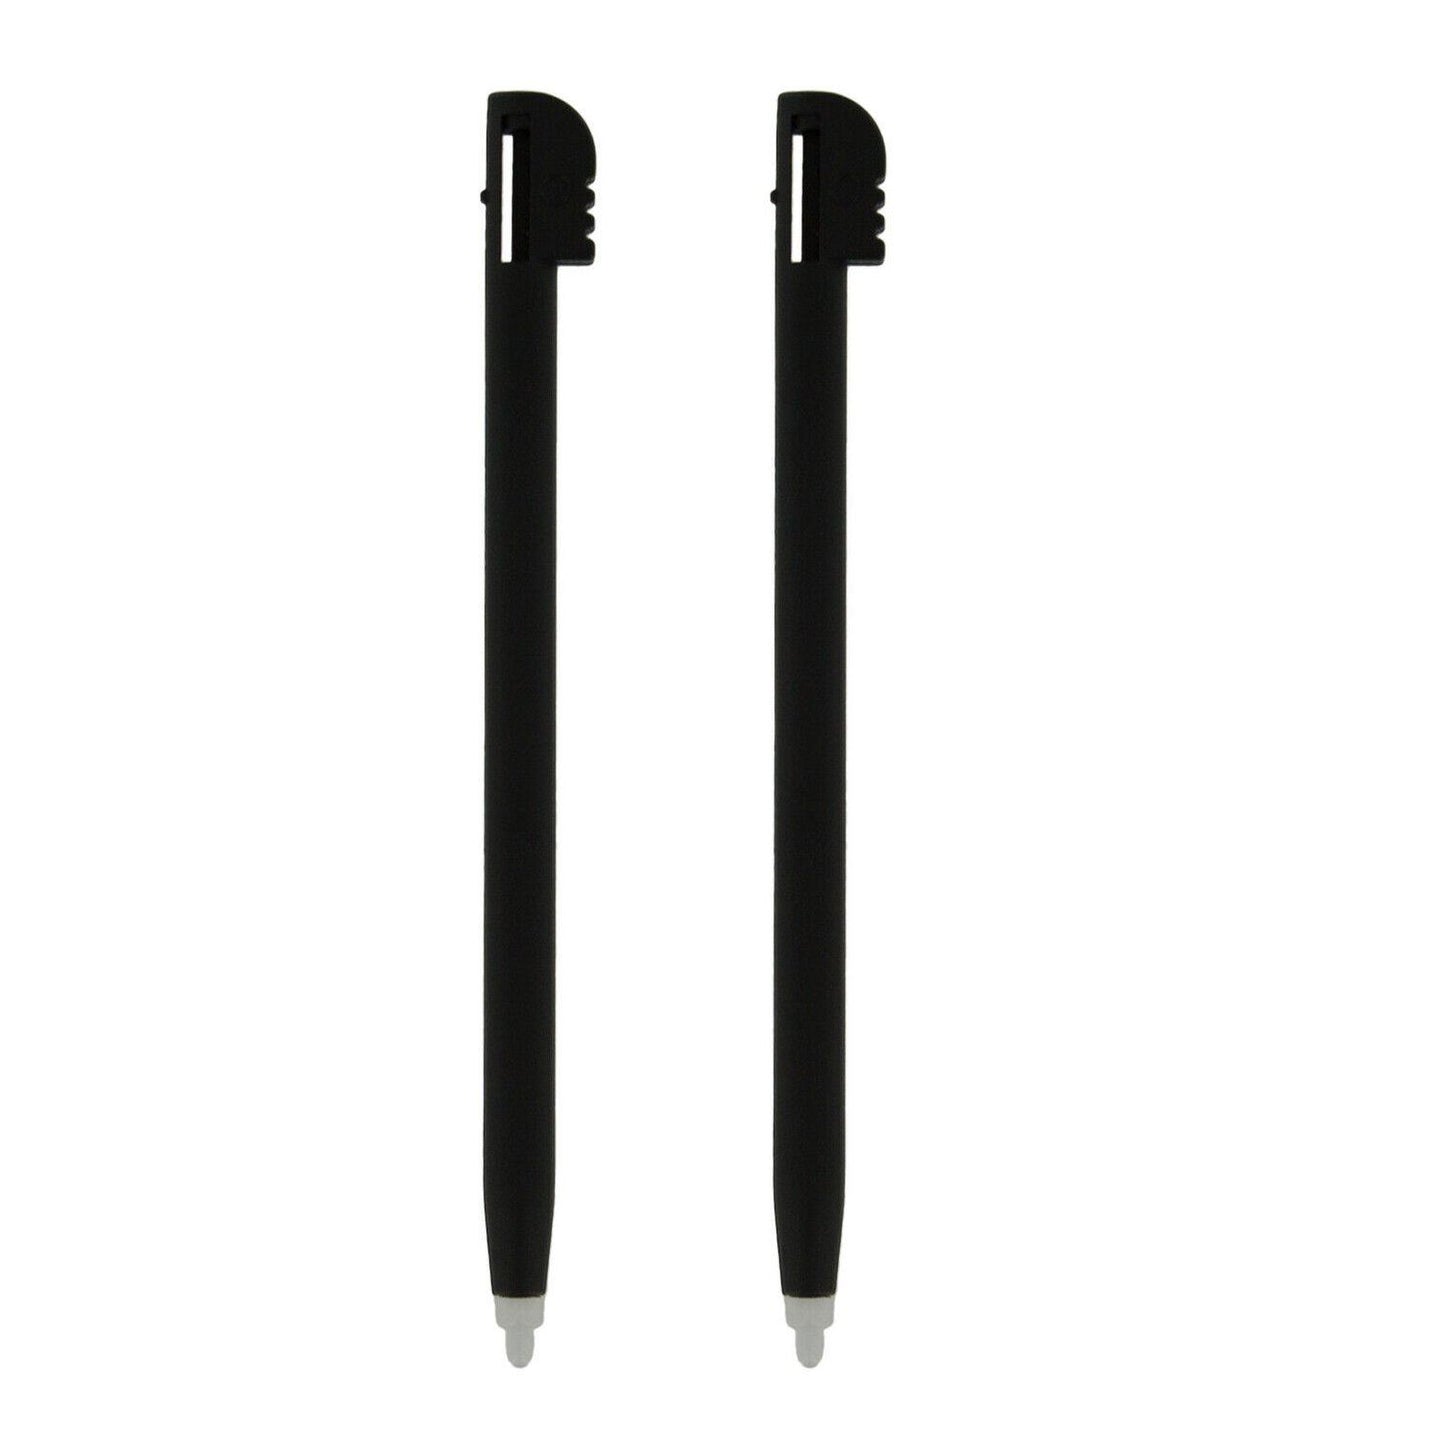 for Nintendo DS Lite - 2 Black OEM Touch Stylus Pens (Silicone Clear Tip) | FPC